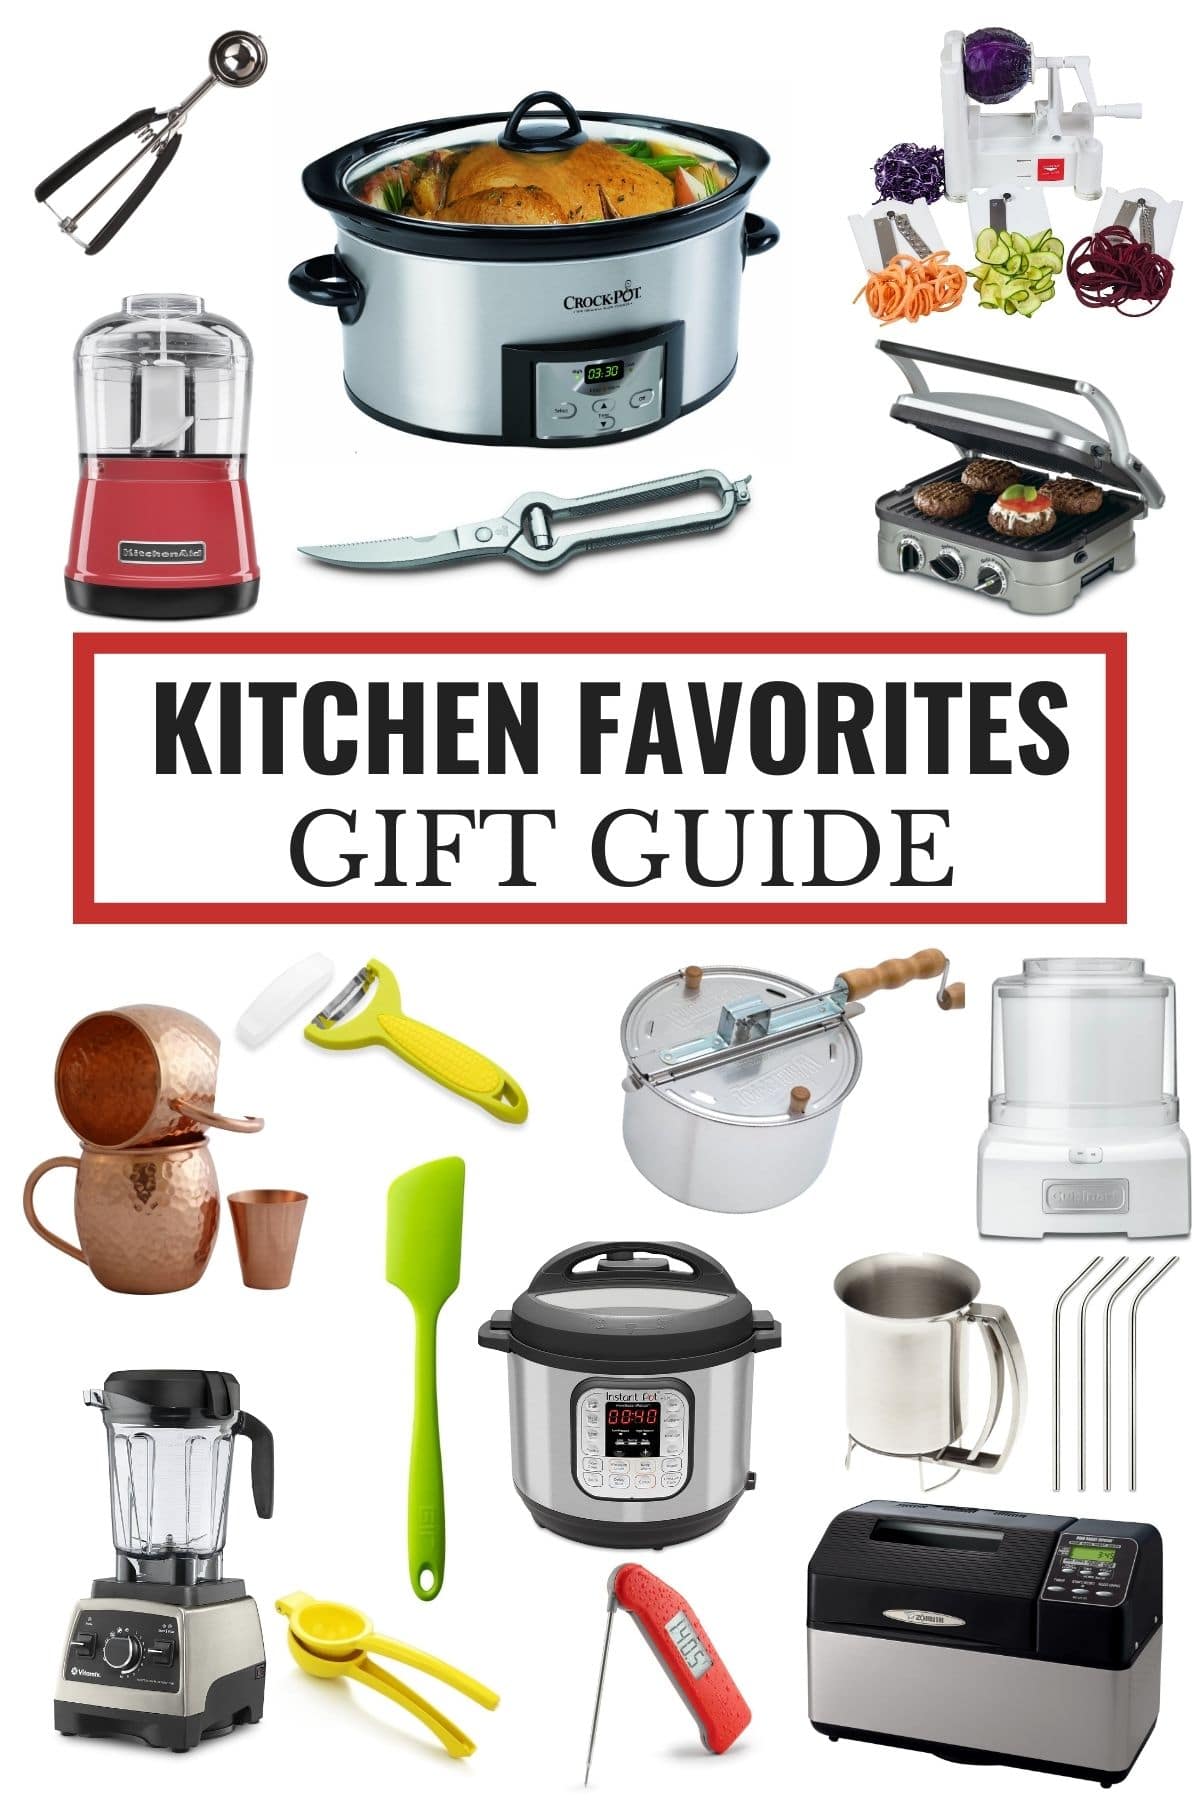 Kitchen Tools Gift Guide title image